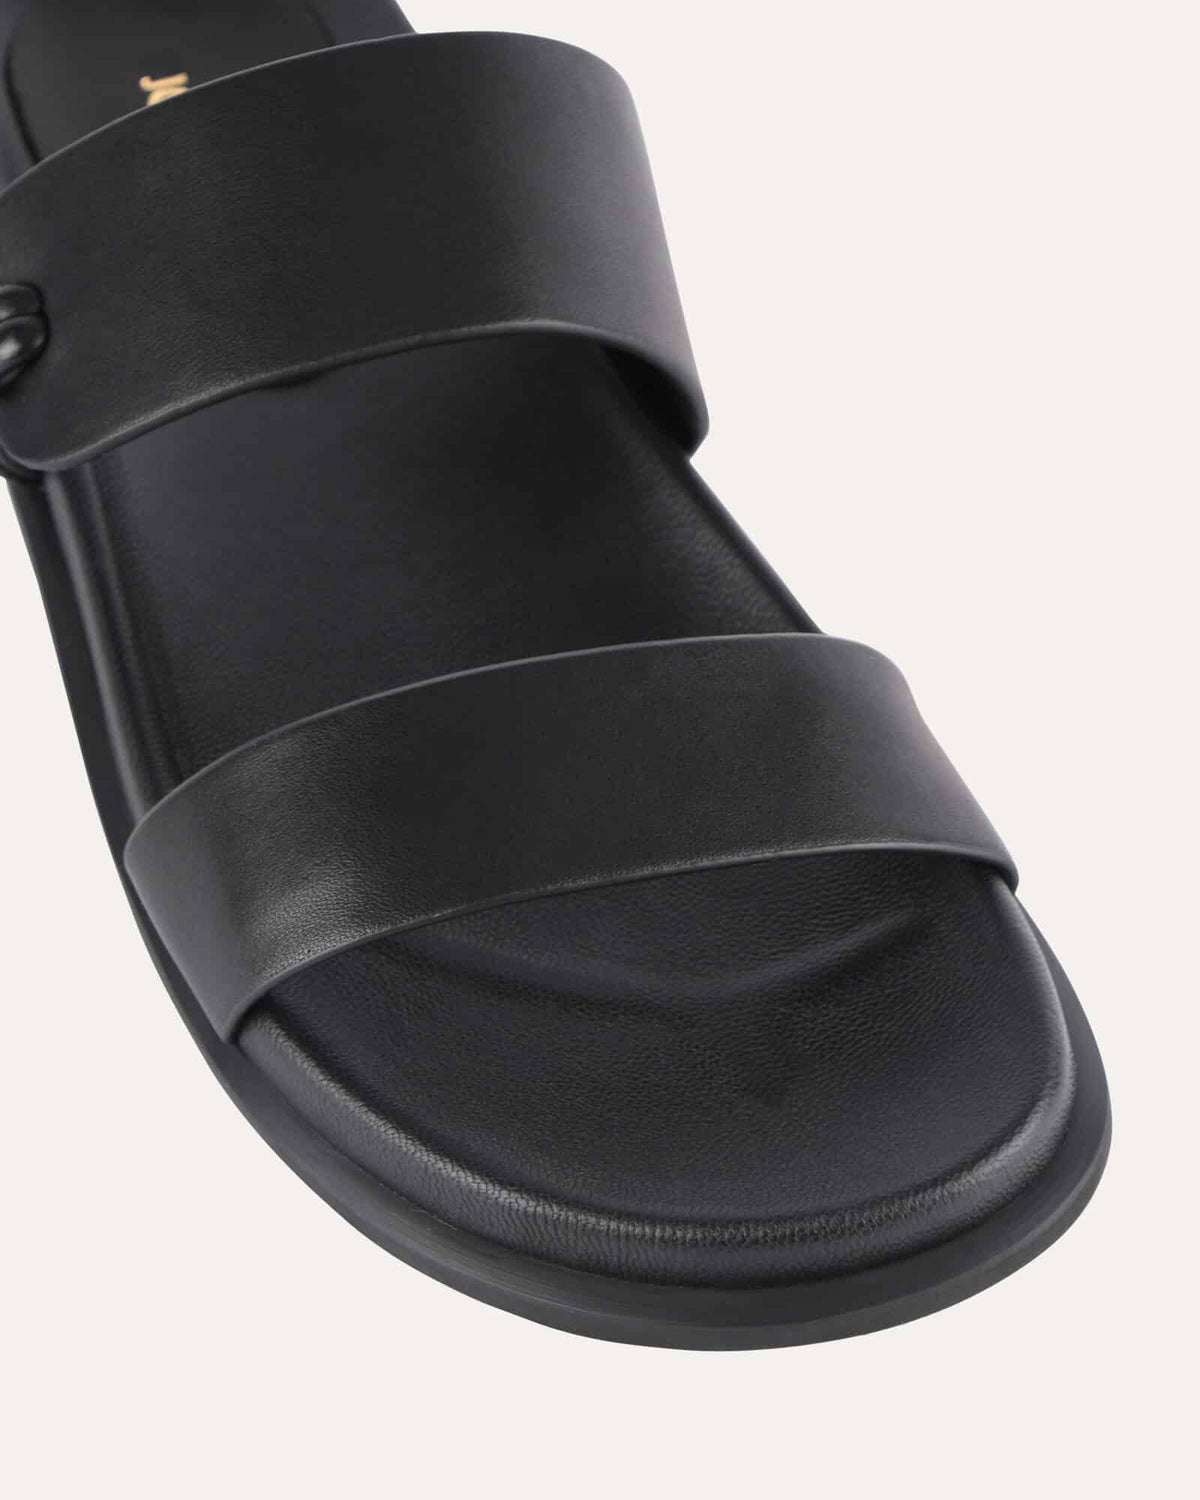 HAYES FLAT SANDALS BLACK LEATHER